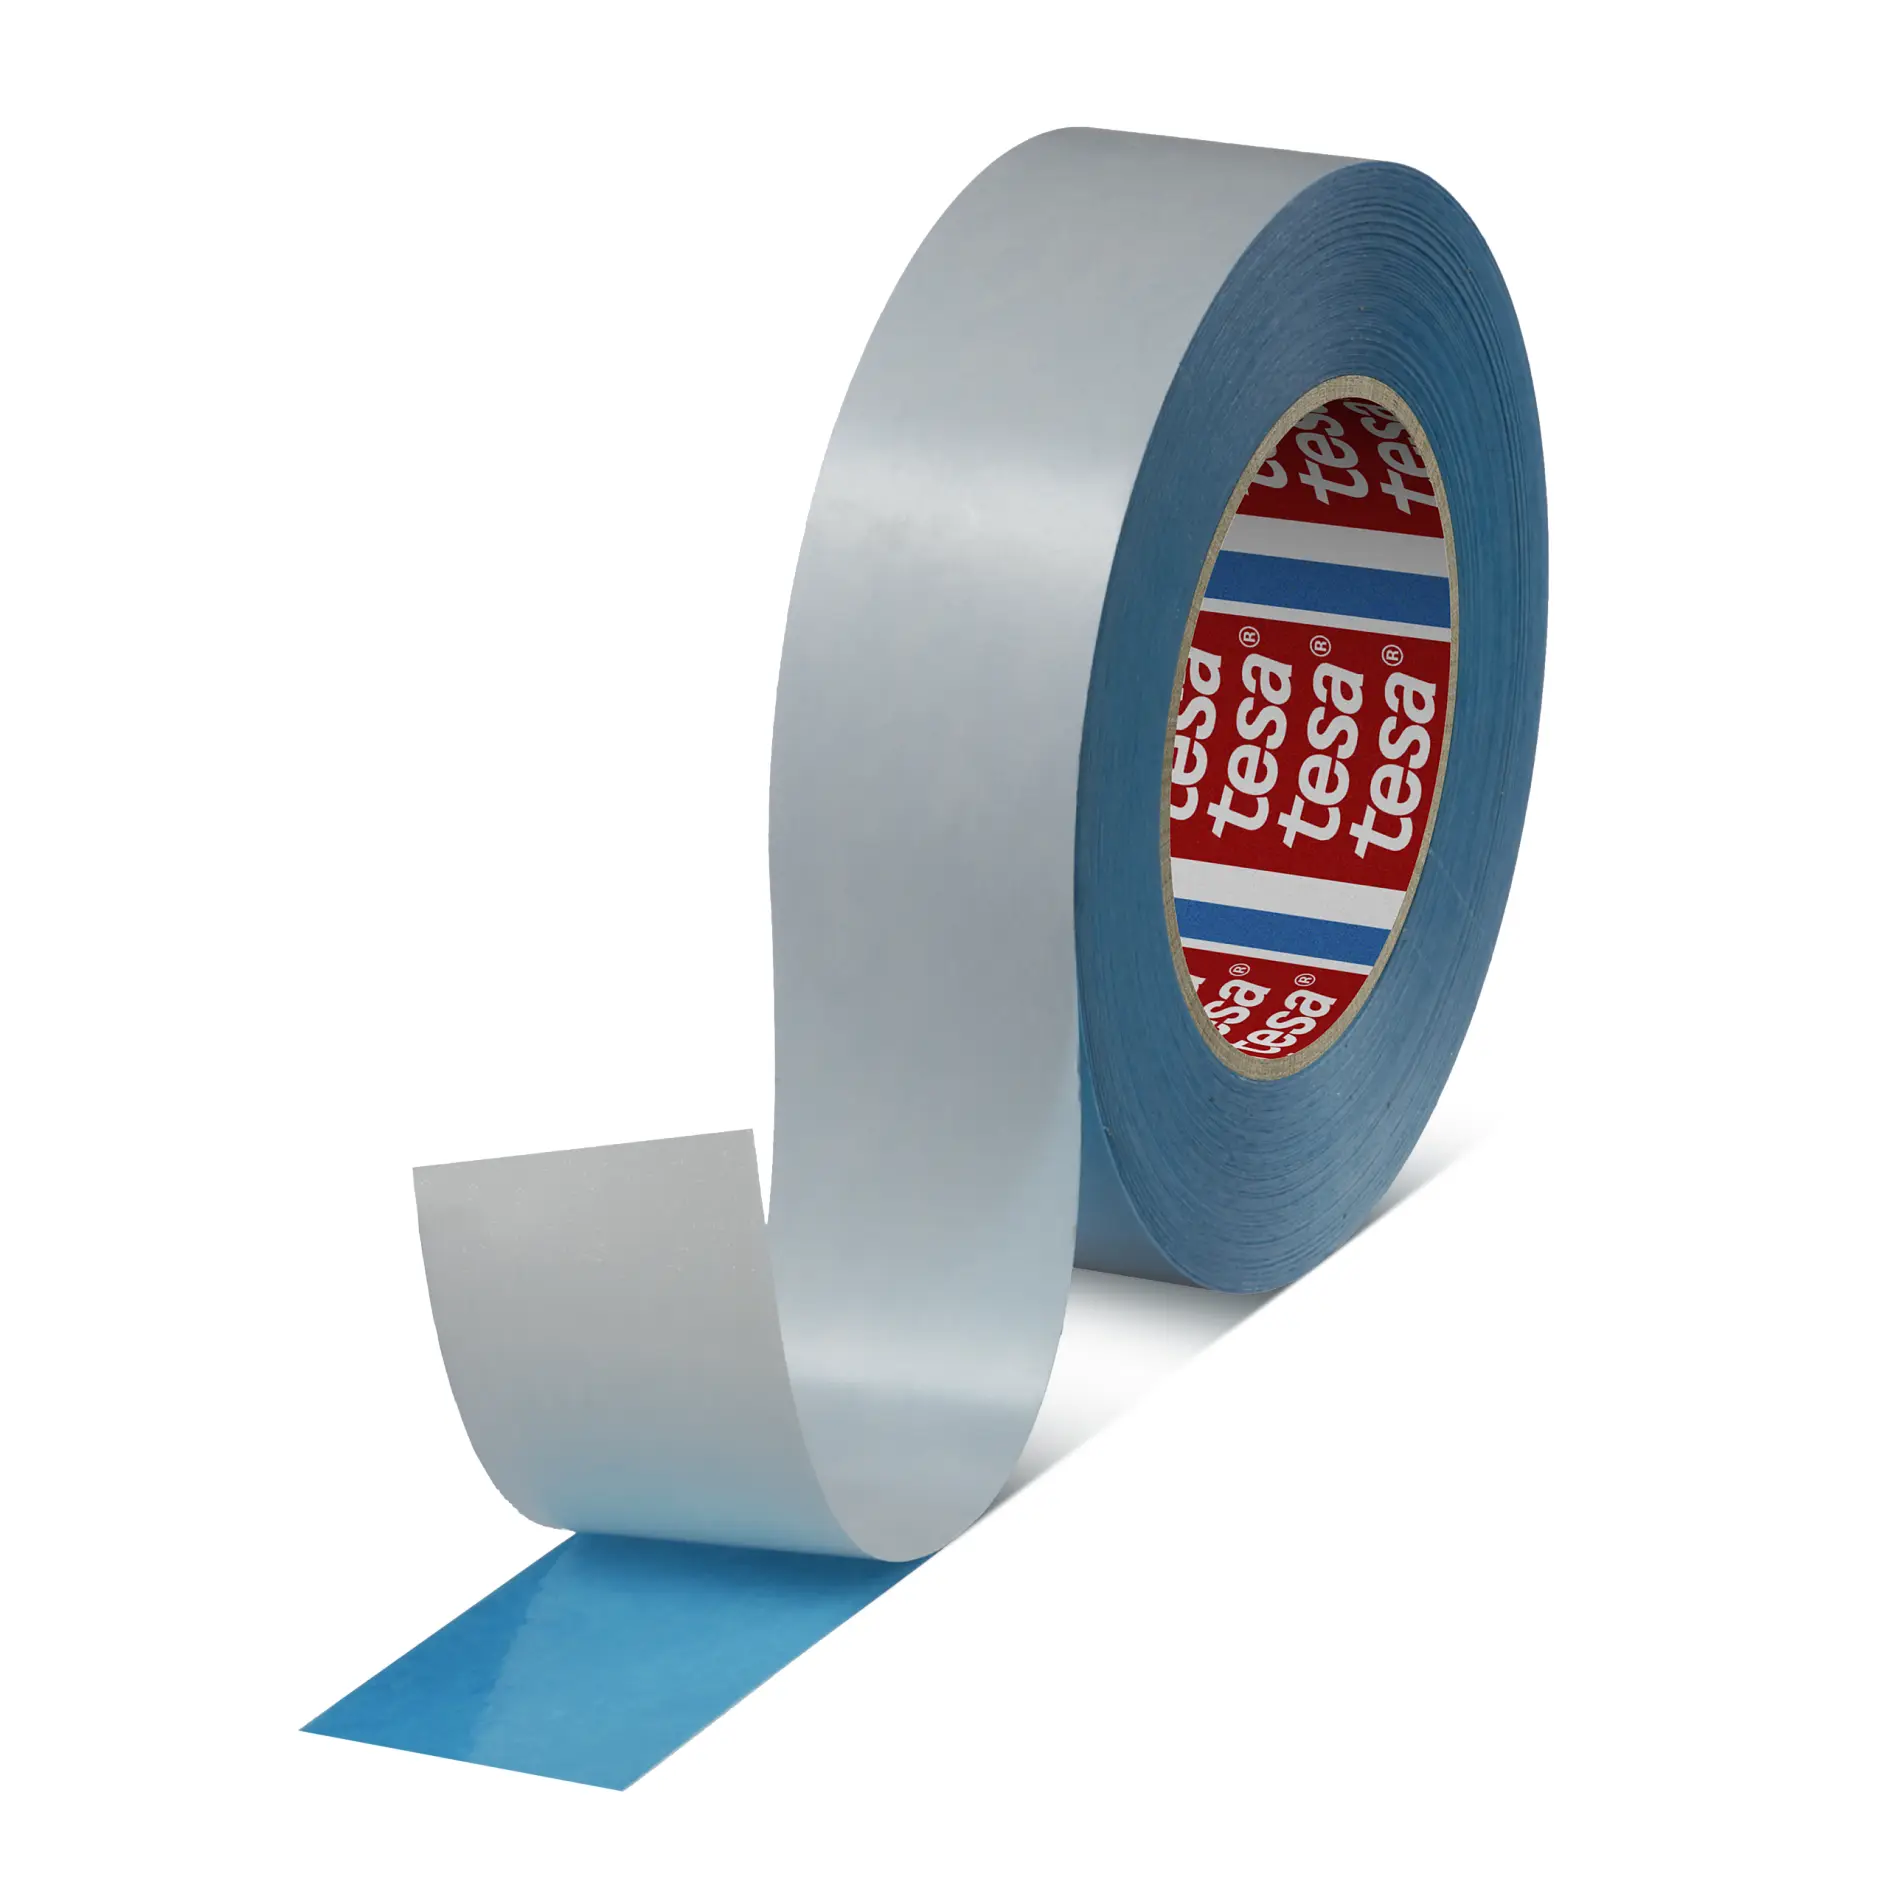 tesa-51914-repulpable-double-sided-splicing-tape-blue-519140003100-pr